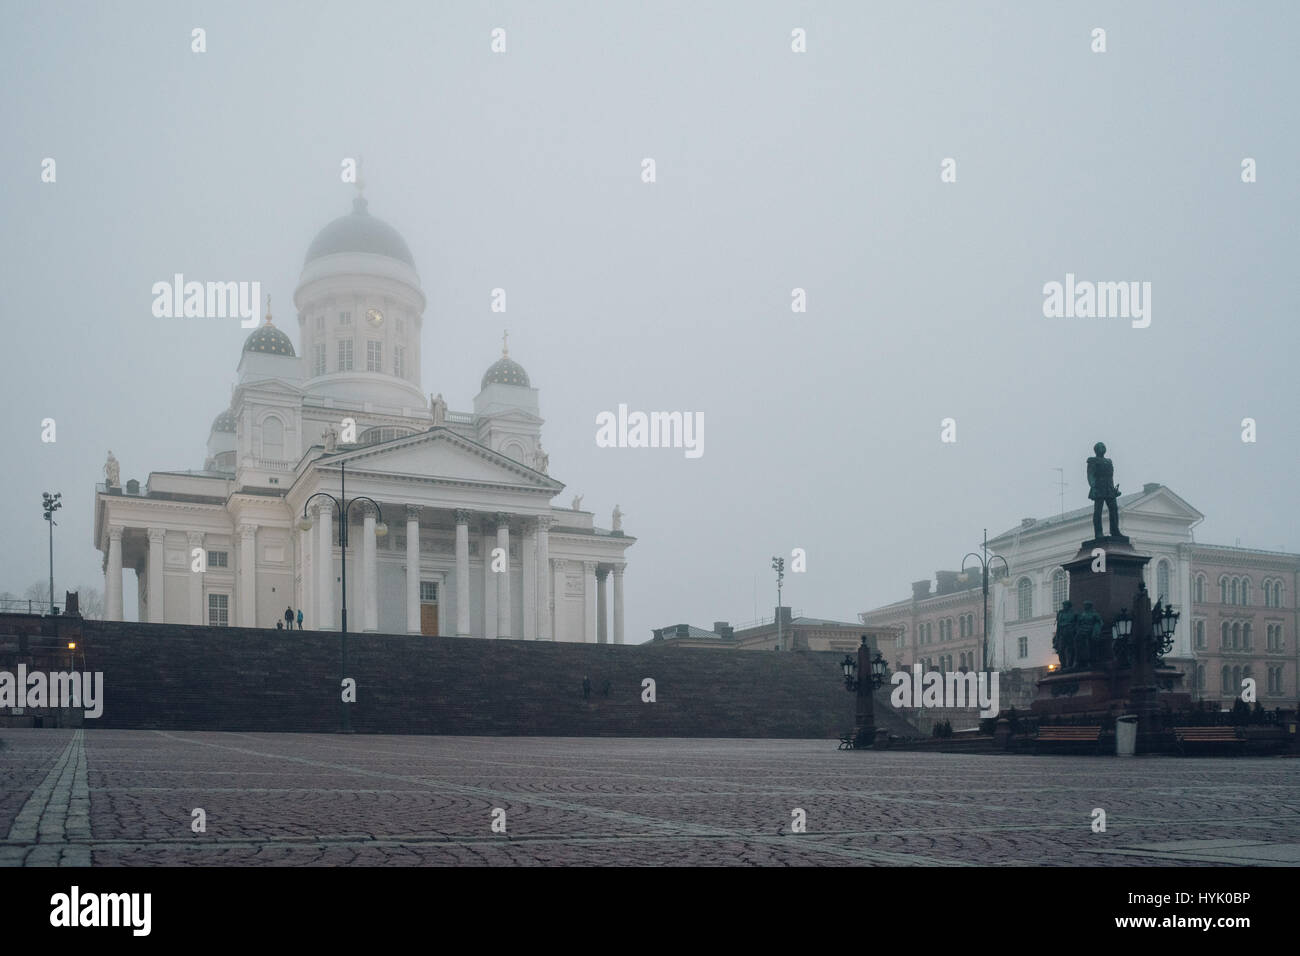 Helsinki Cathedral and statue of emperor Alexander II by foggy day, Finland Stock Photo